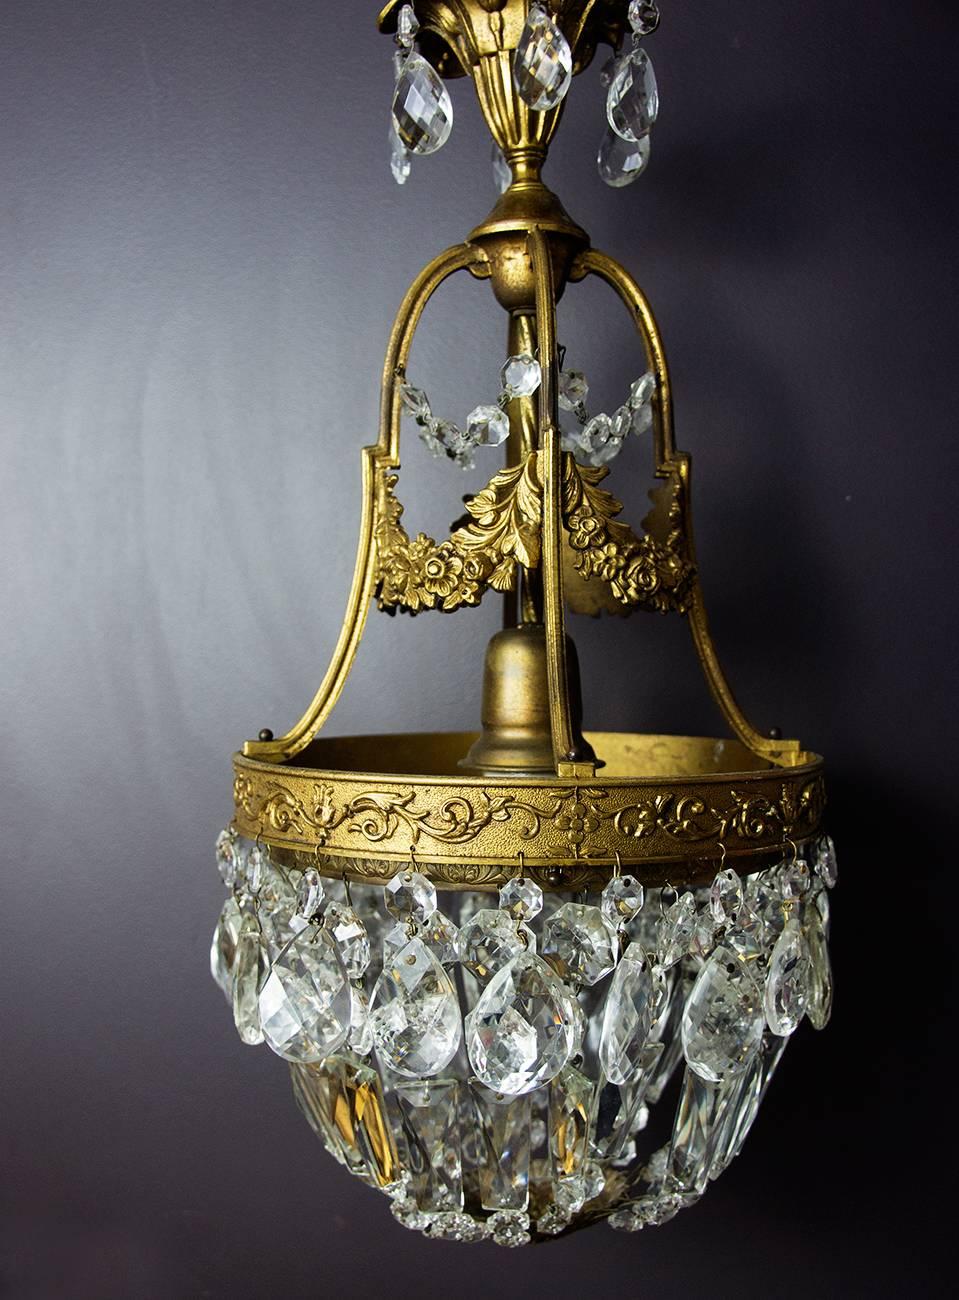 Beautiful vintage Empire style Italian brass and crystal chandelier
PLEASE NOTE, crystal drops are round, not long like on the first picture, I apologize for the confusion
Very good vintage condition (please see all photos)
One light bulb socket